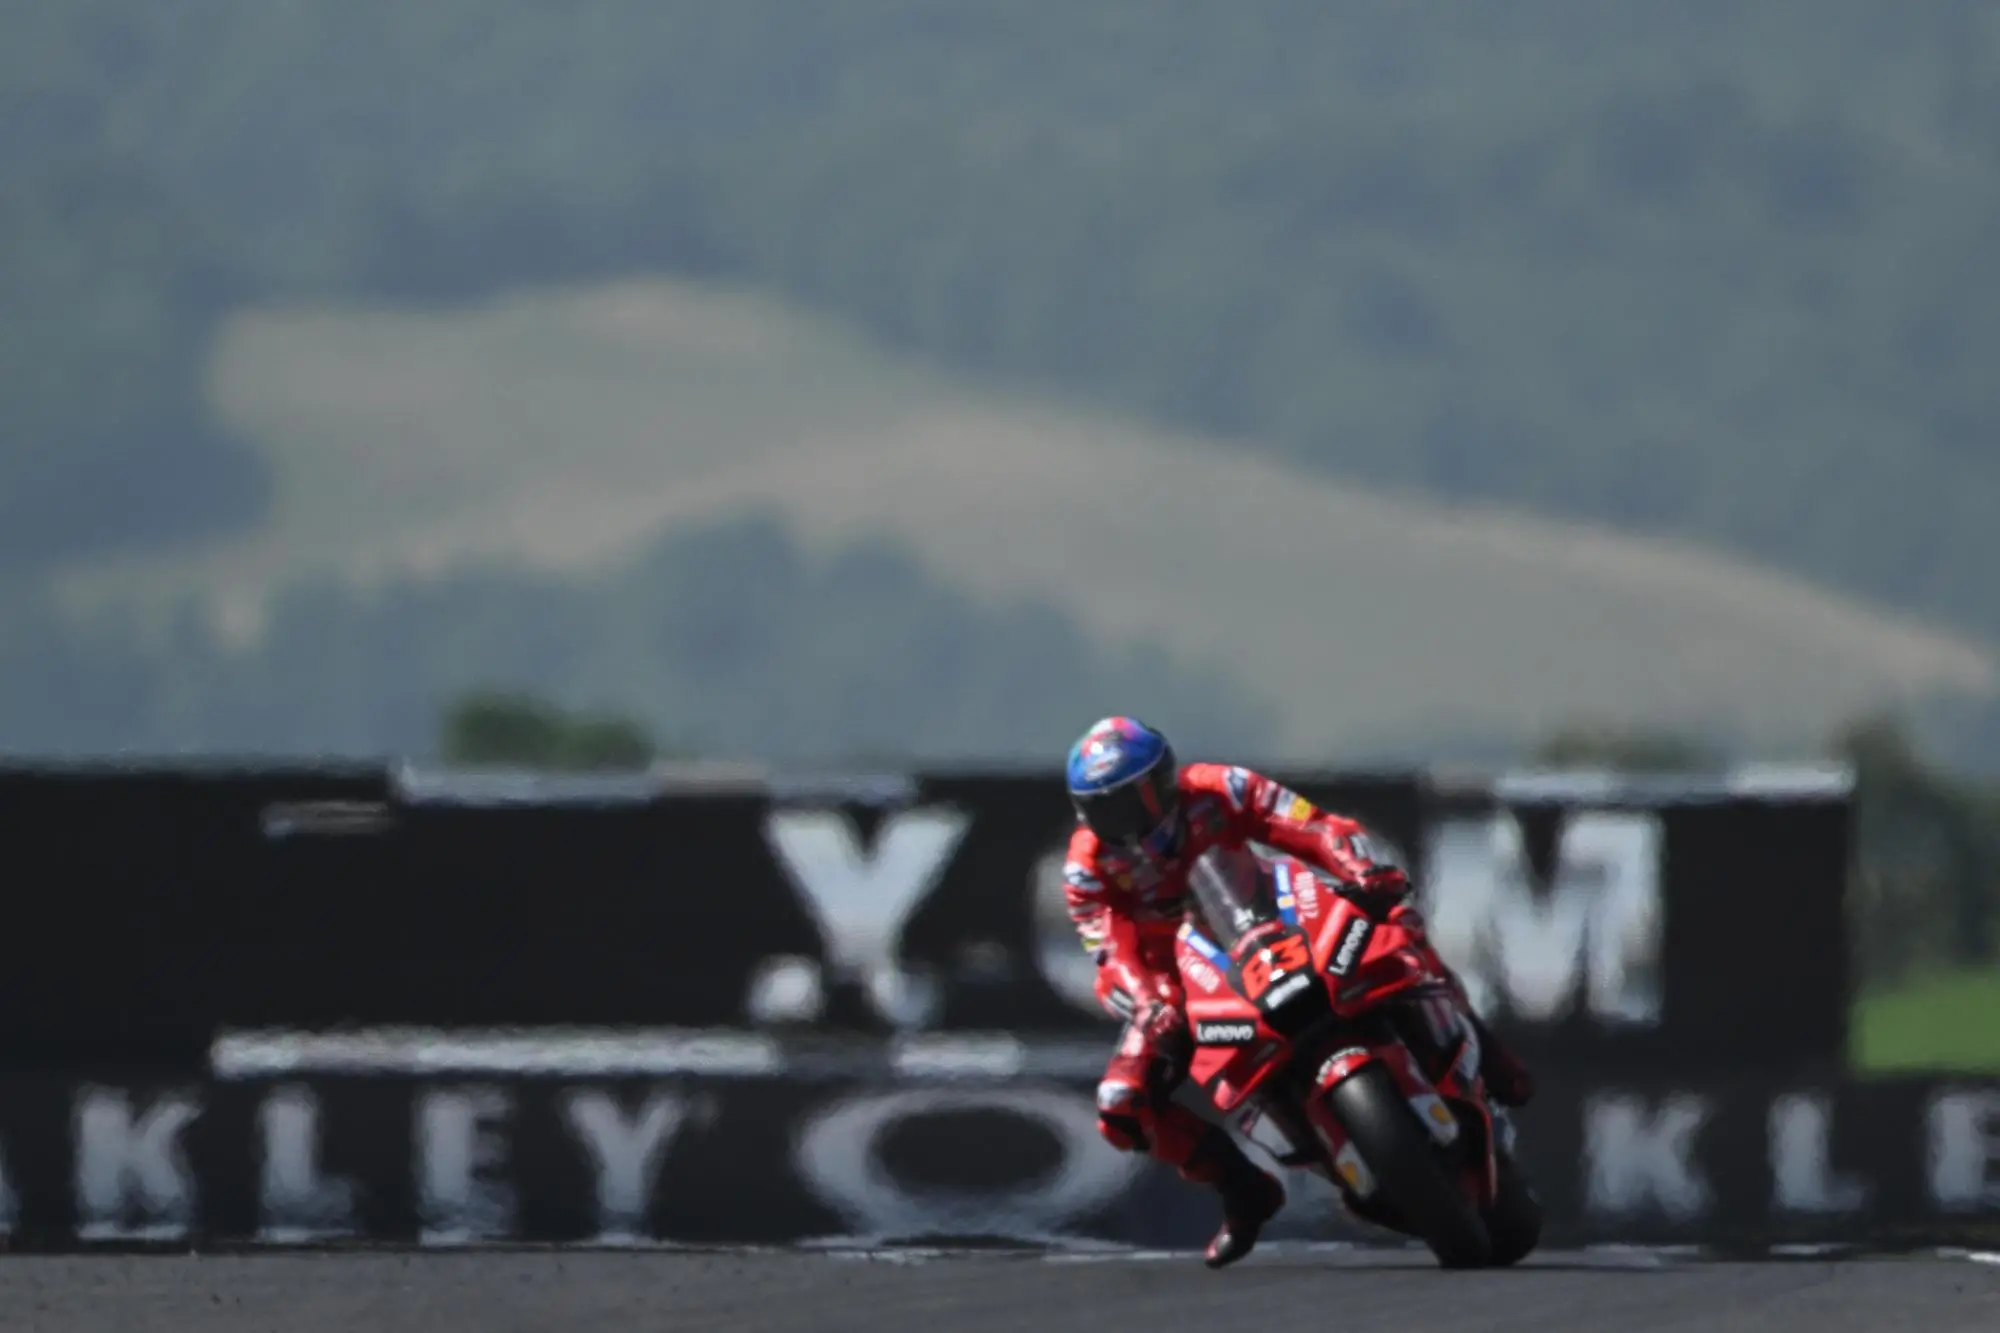 Italy's Francesco Bagnaia Ducati Lenovo Team in action during the free practice session of the Motorcycling Grand Prix of Italy at the Mugello circuit in Scarperia, central Italy, 28 May 2022. ANSA/CLAUDIO GIOVANNINI